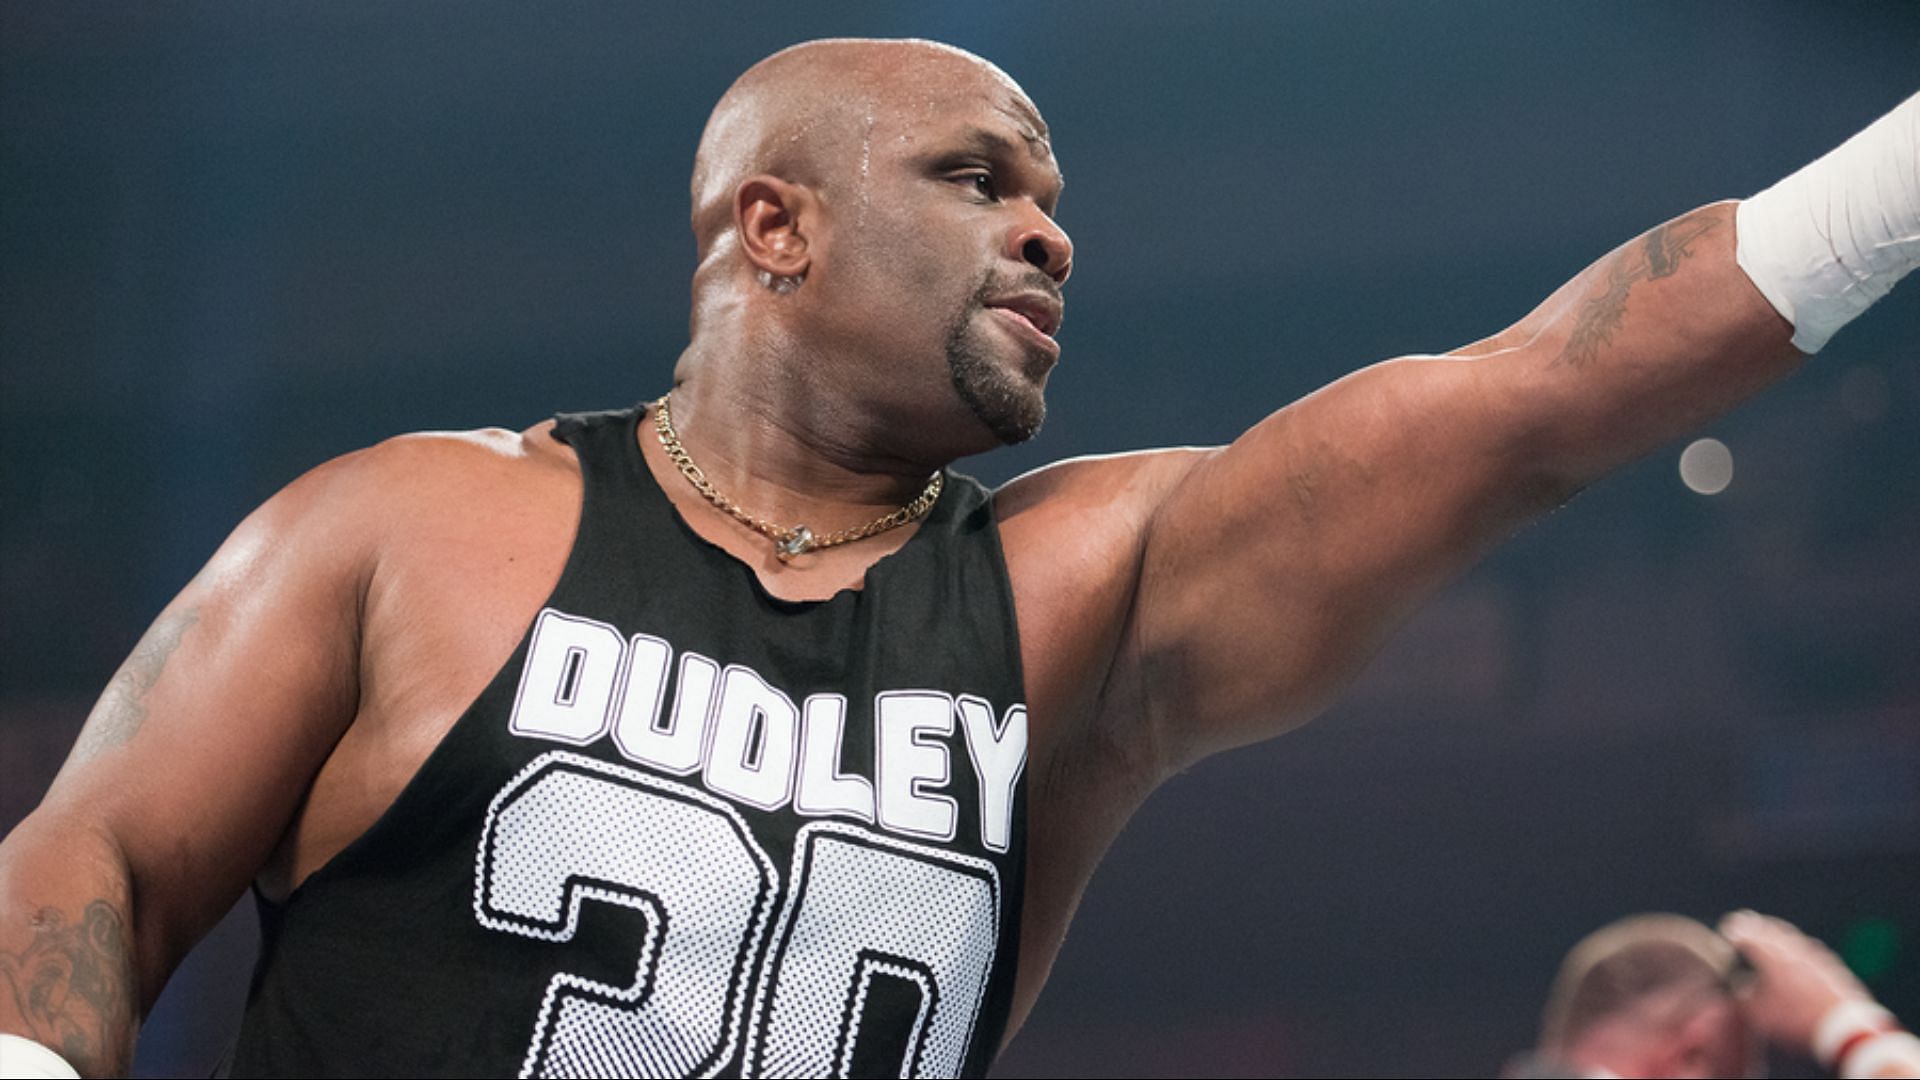 D-Von Dudley had some interesting thoughts to share